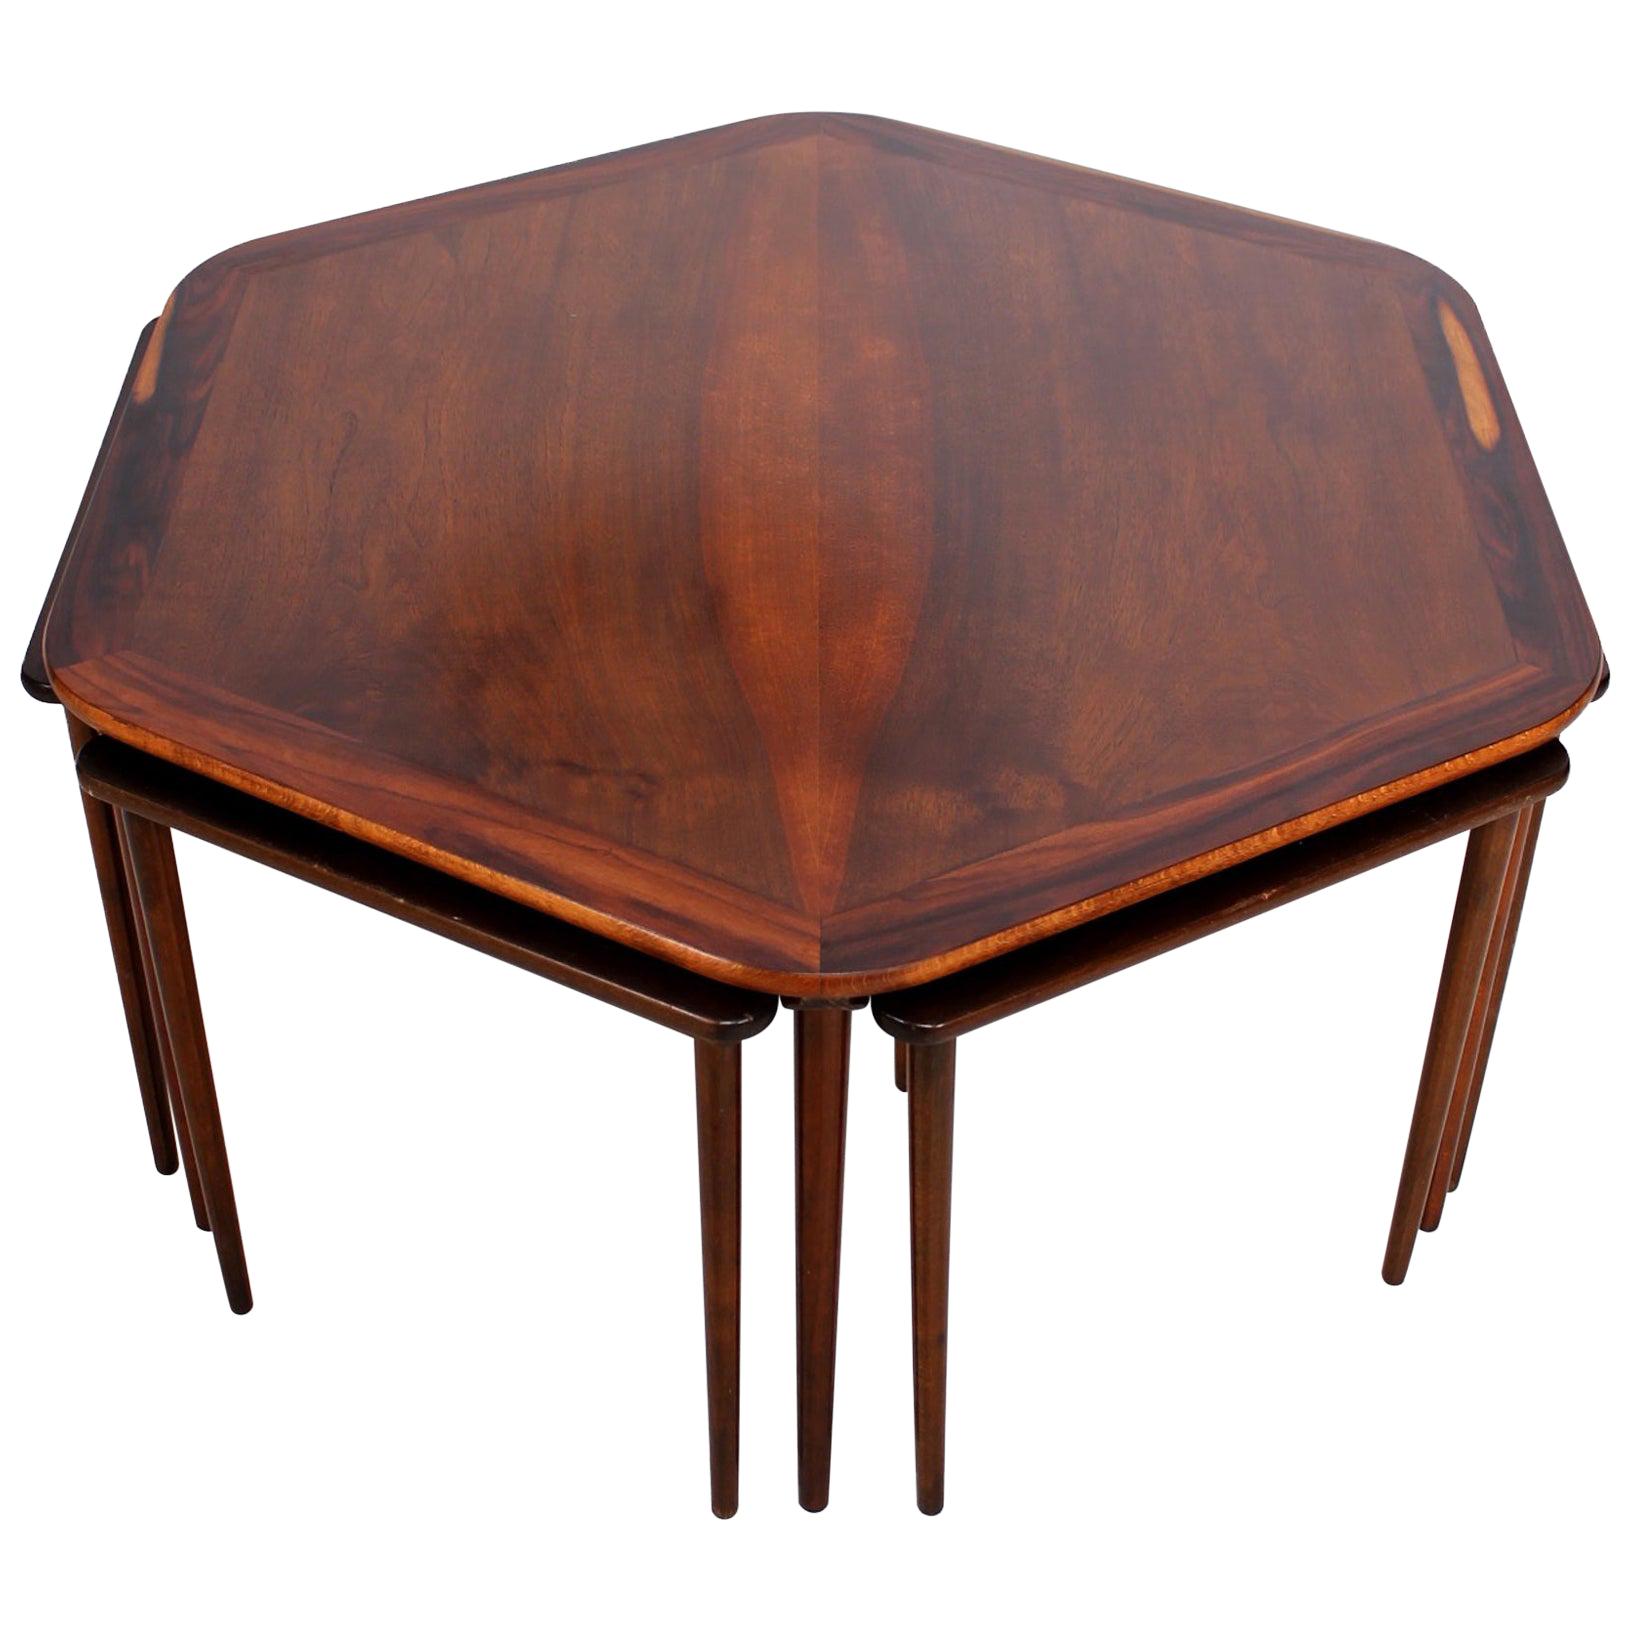 France & Son Rosewood Hexagonal Coffee Table and 6 Nesting Tables 1950s Denmark